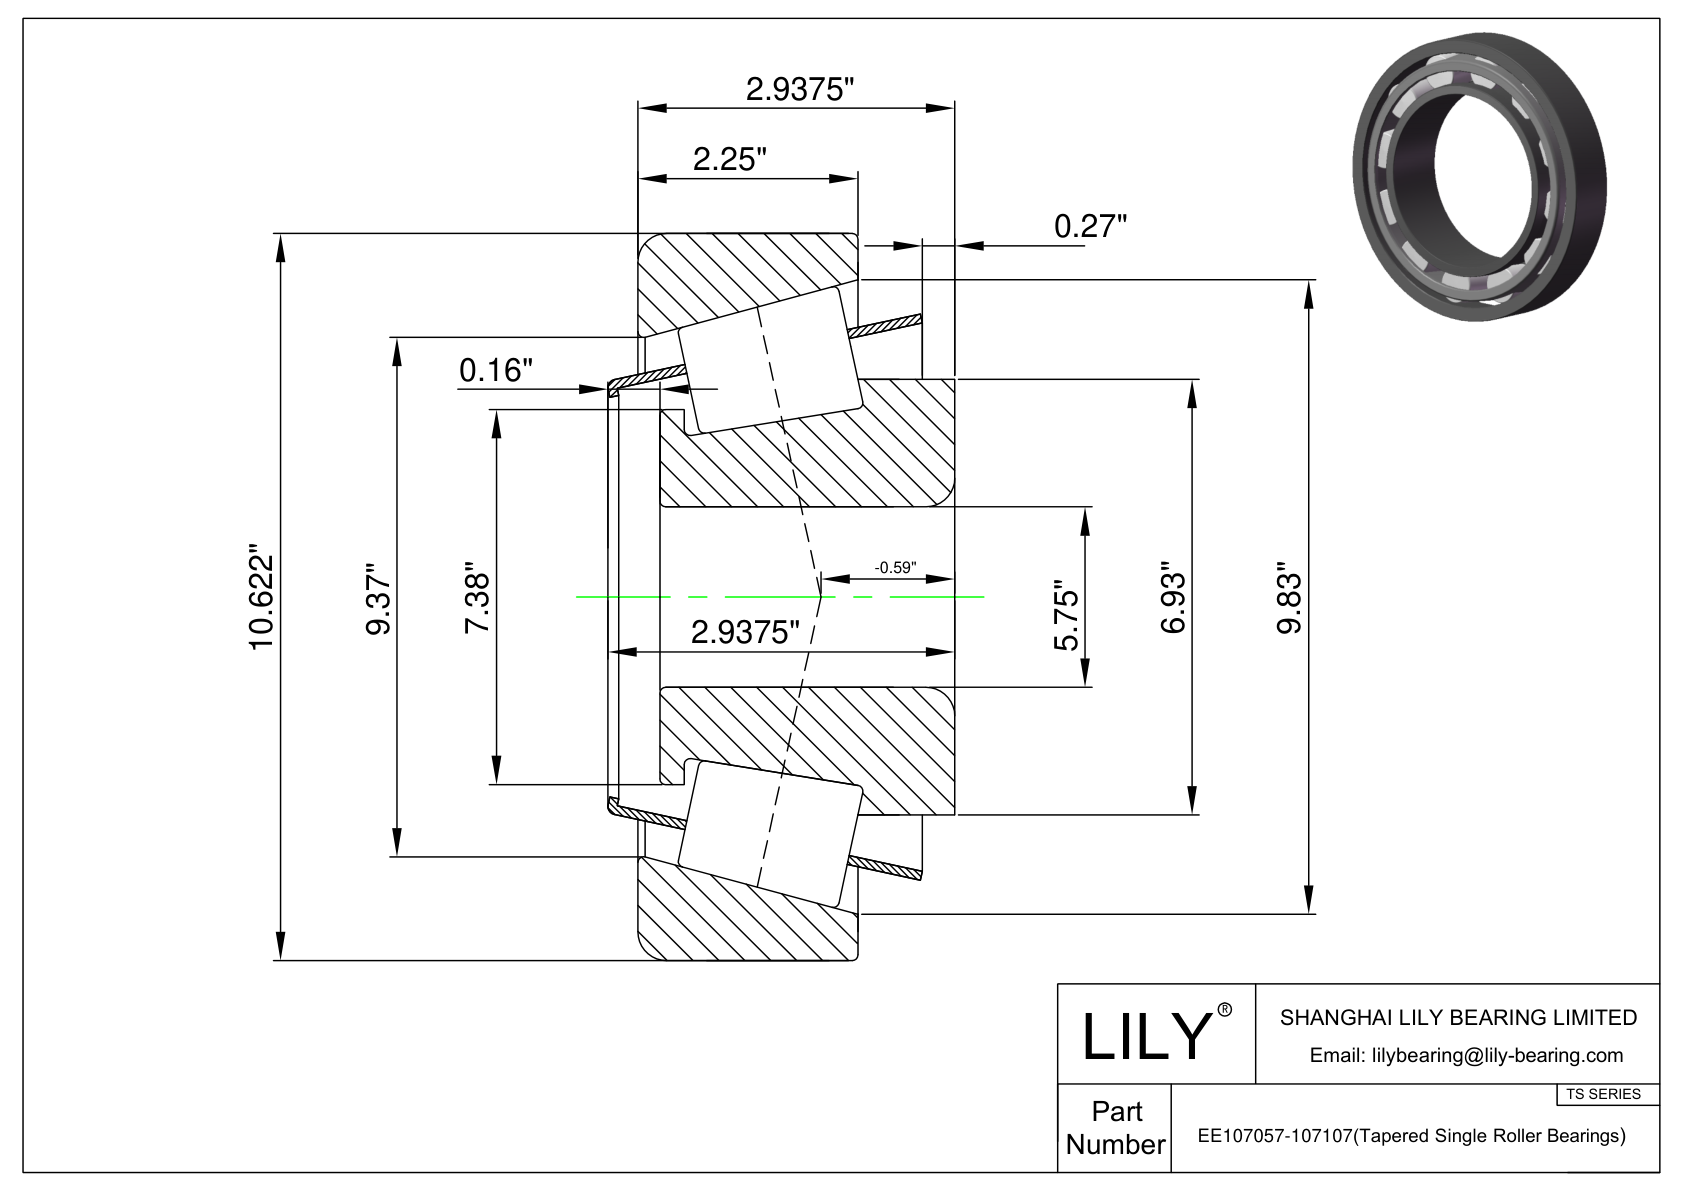 EE107057-107107 TS (Tapered Single Roller Bearings) (Imperial) cad drawing